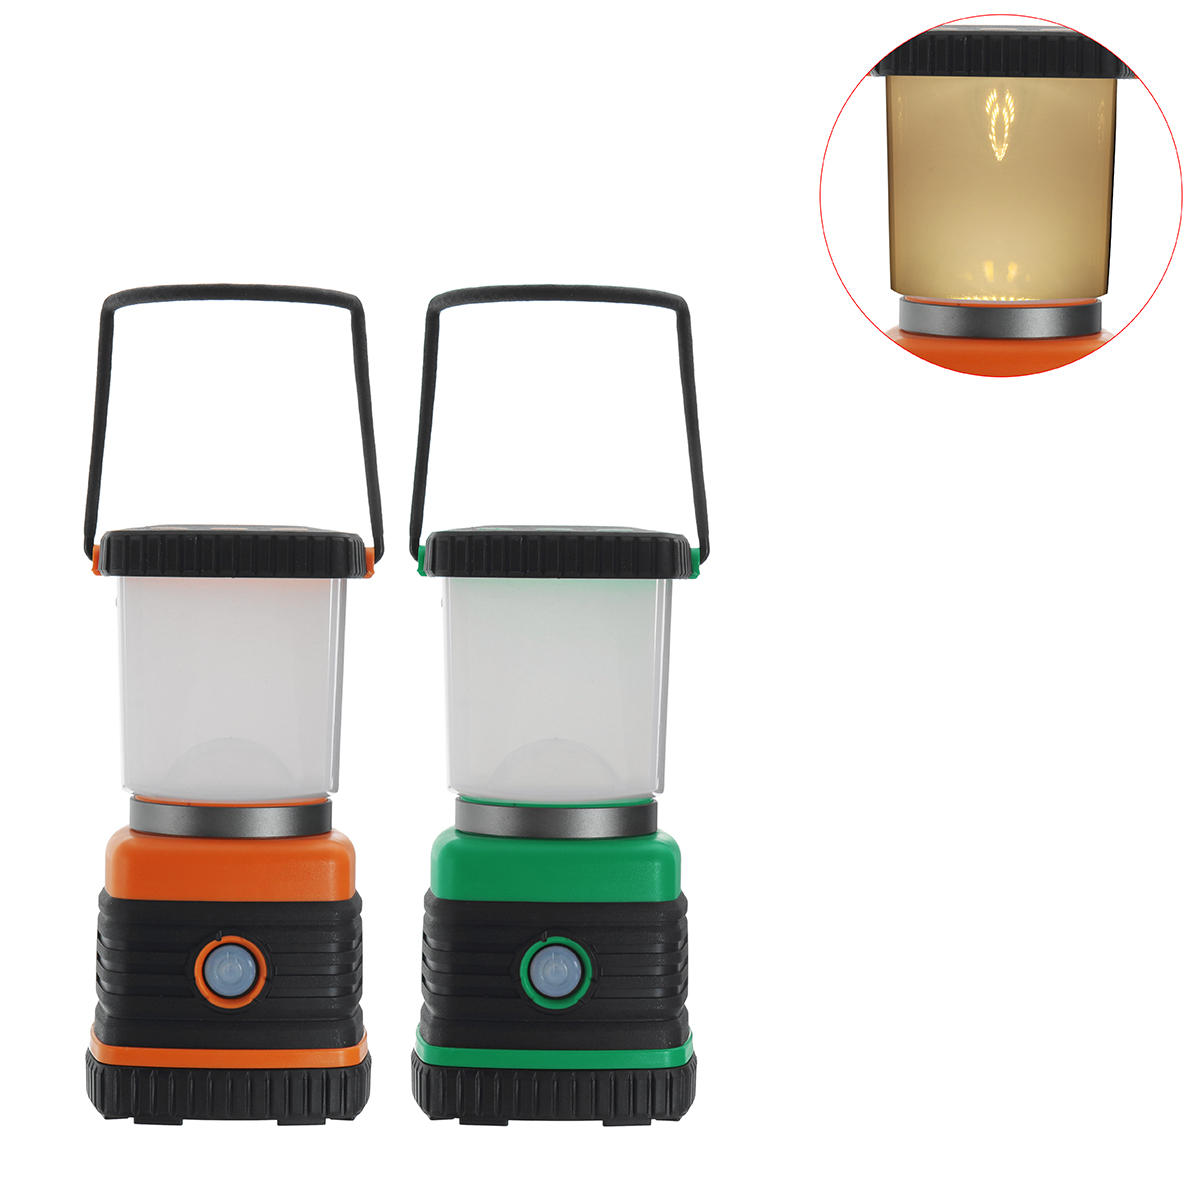 9W 500LM 46LED Portable Outdoor Camping Zelt Licht Batterie Dimmbare Lampe Laterne